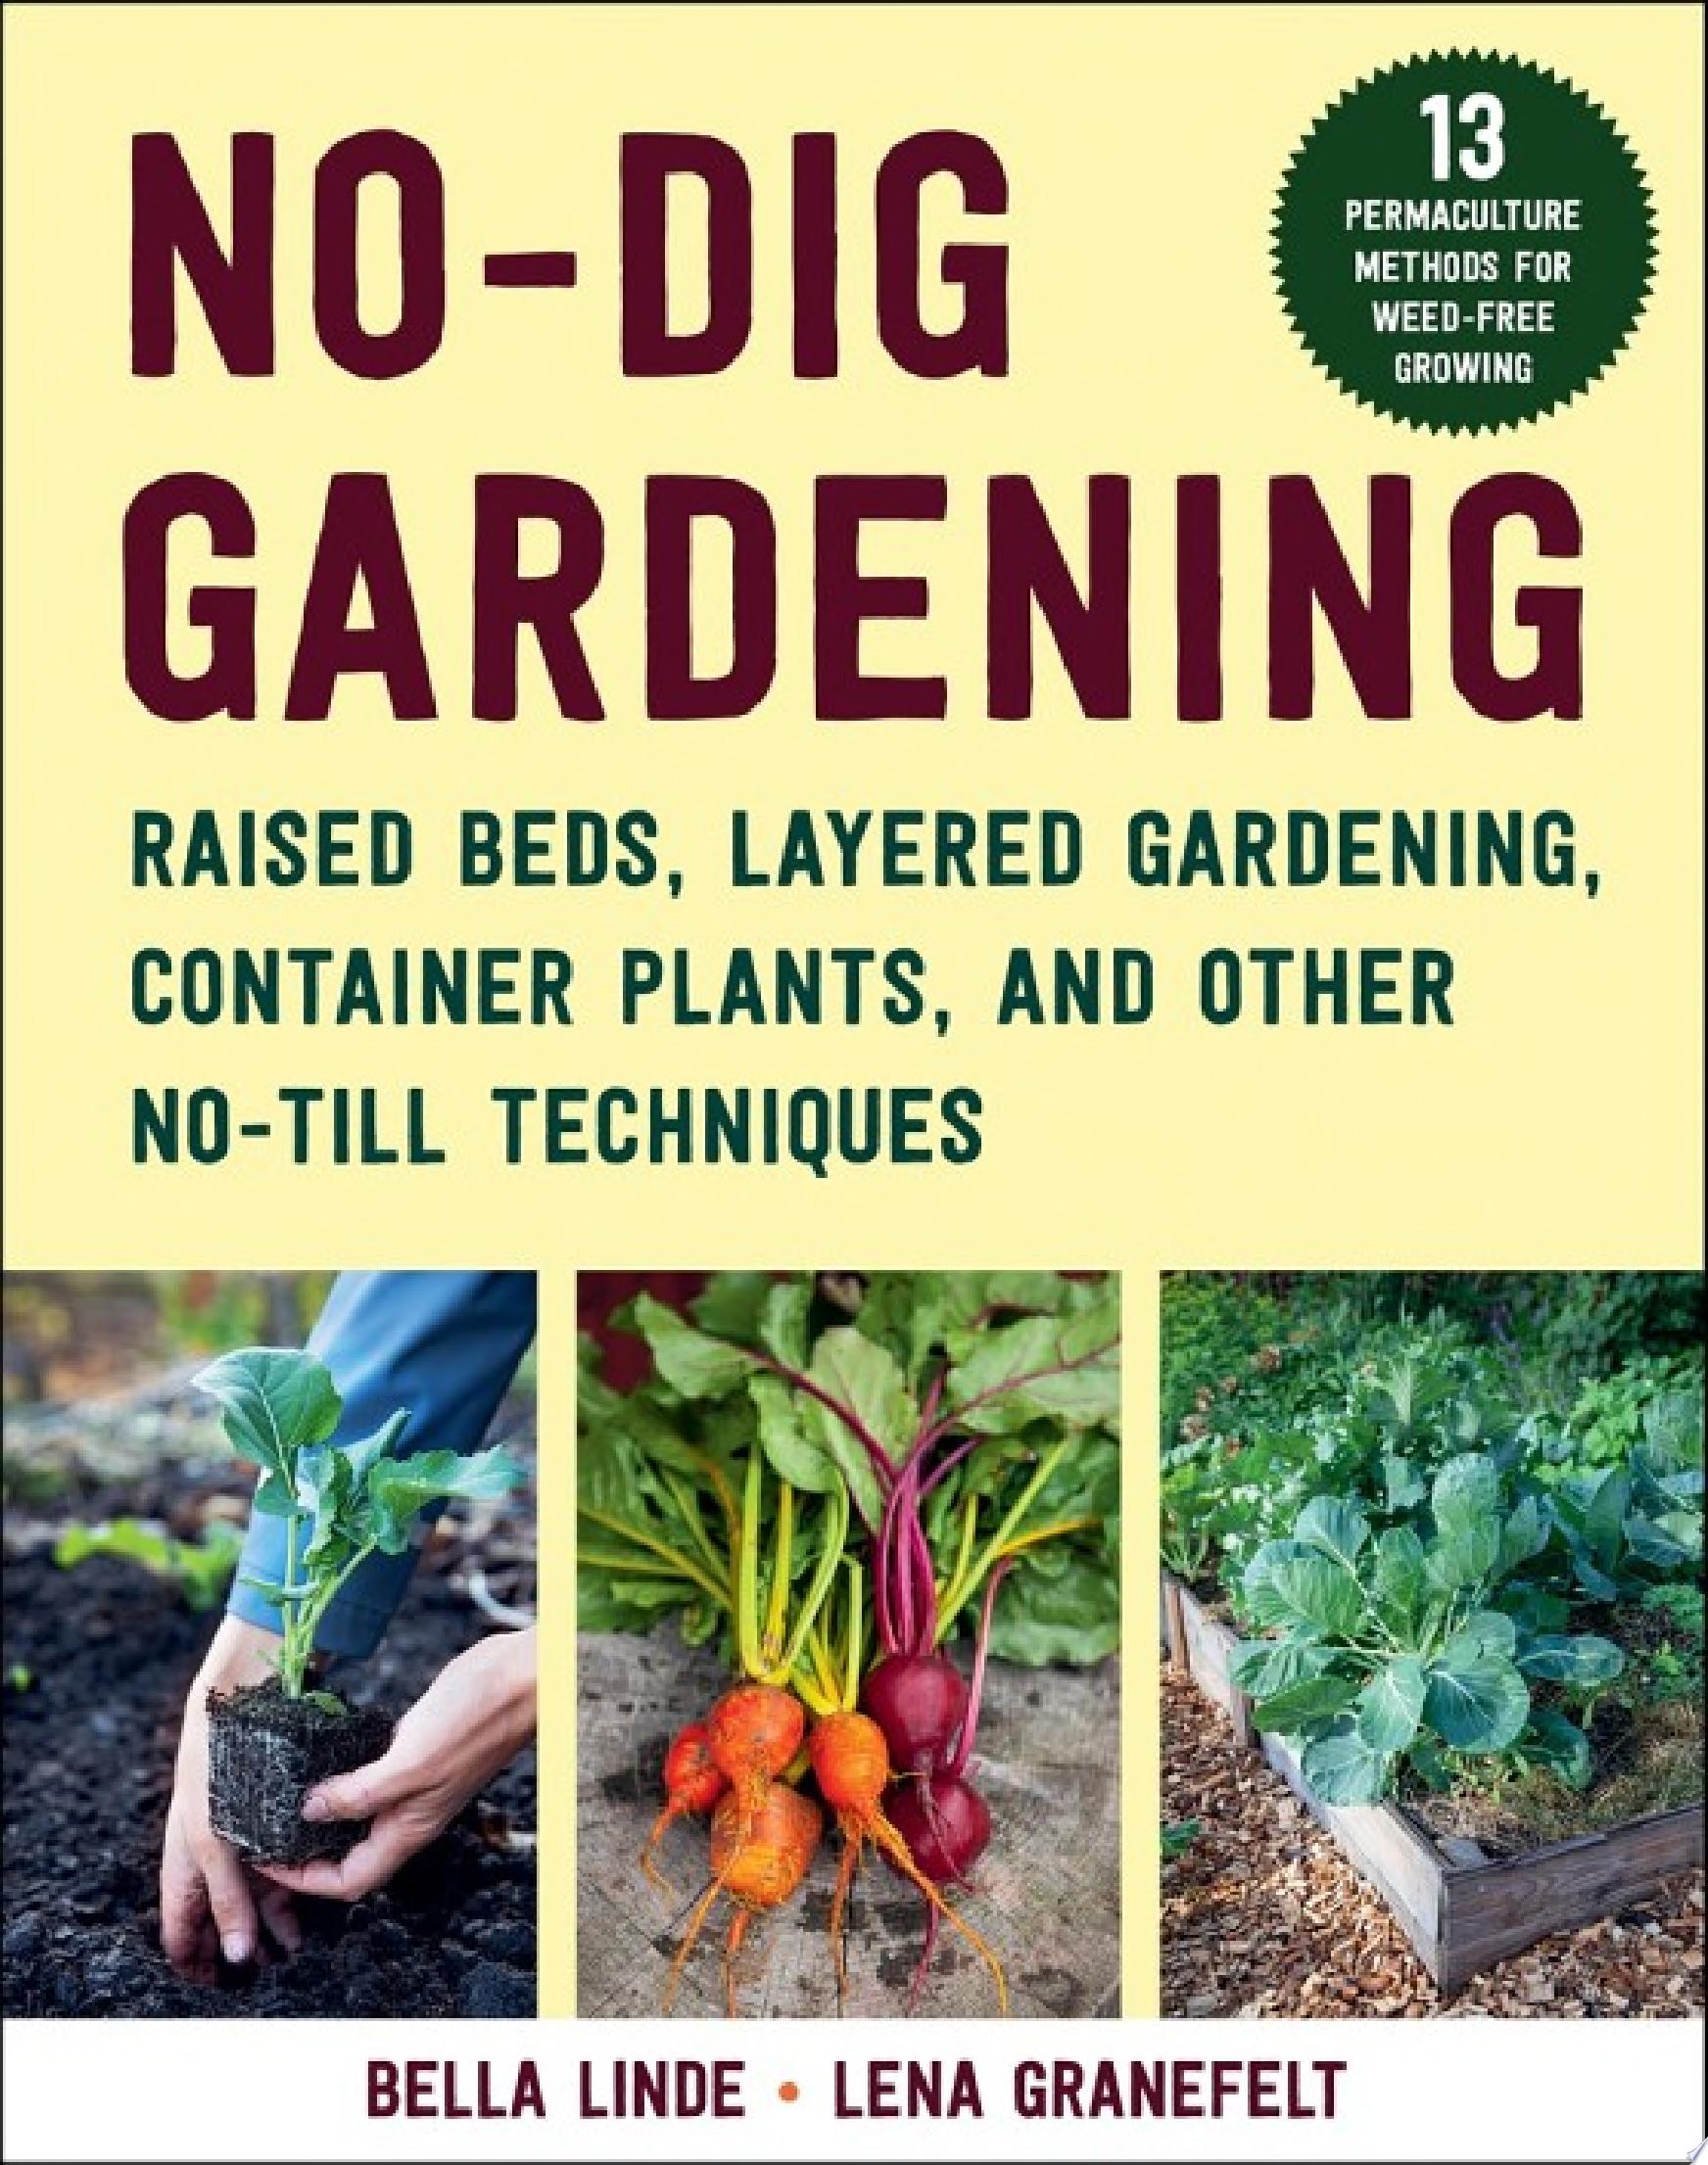 Image for "No-Dig Gardening"